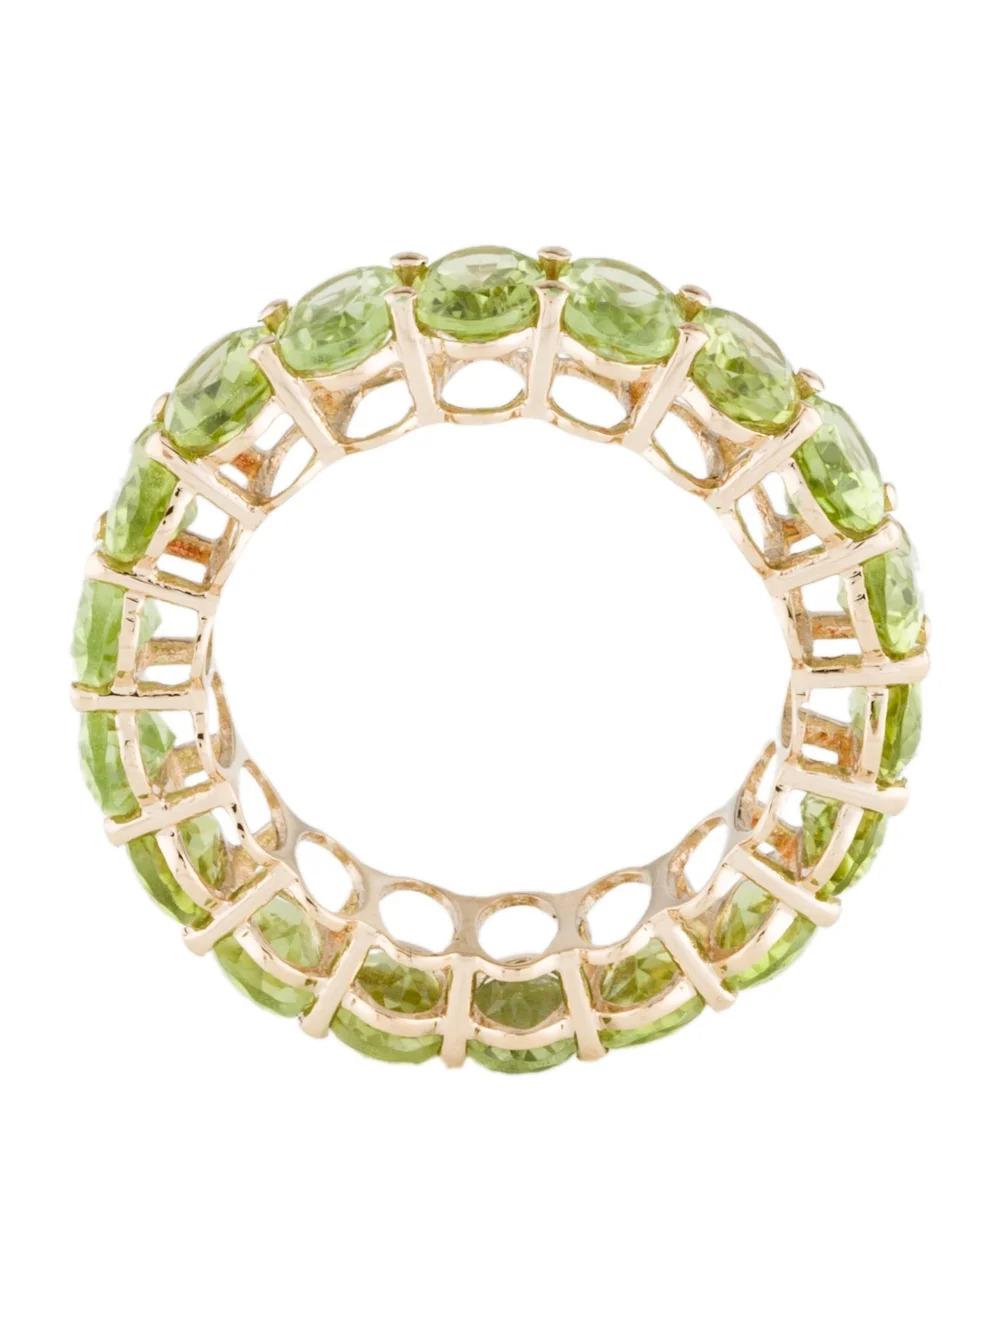 Women's 14K Peridot Eternity Band Ring - Size 7, Timeless Style, Vibrant Green Gemstones For Sale